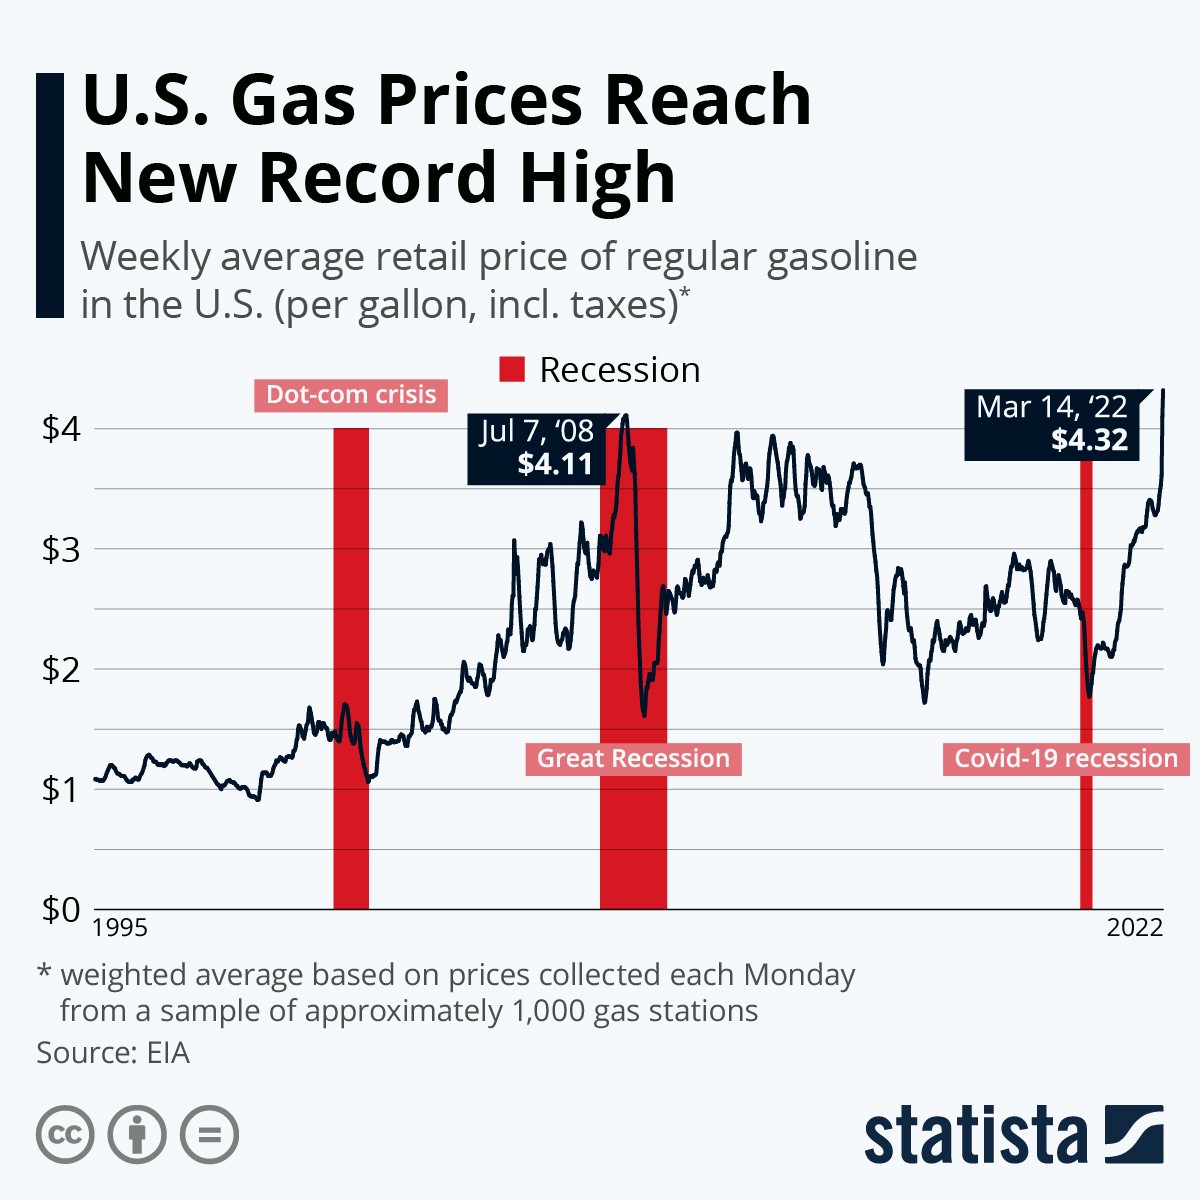 Weekly average retail price of regular gasoline in the USA